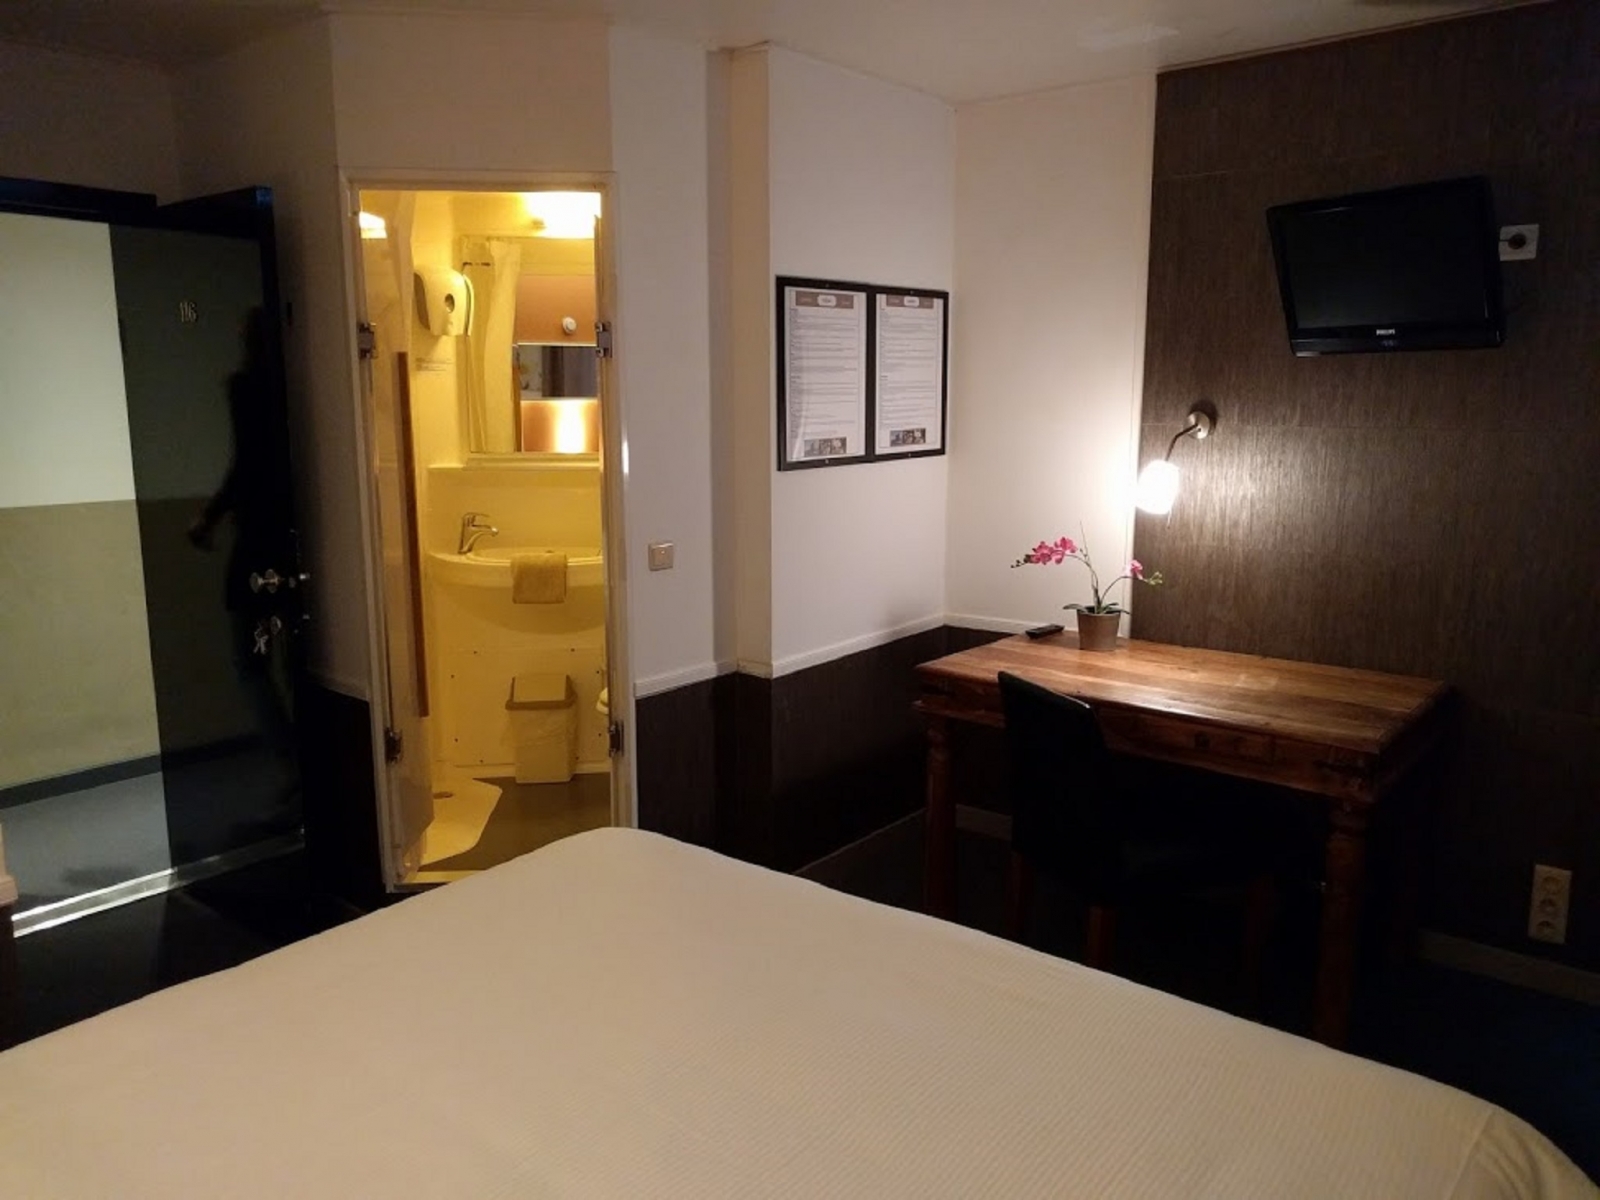 Canalview Hotel ter Reien <br/>112.57 ew <br/> <a href='http://vakantieoplossing.nl/outpage/?id=7d6cc15e38cf7e3ee1a7ac0d515b5110' target='_blank'>View Details</a>